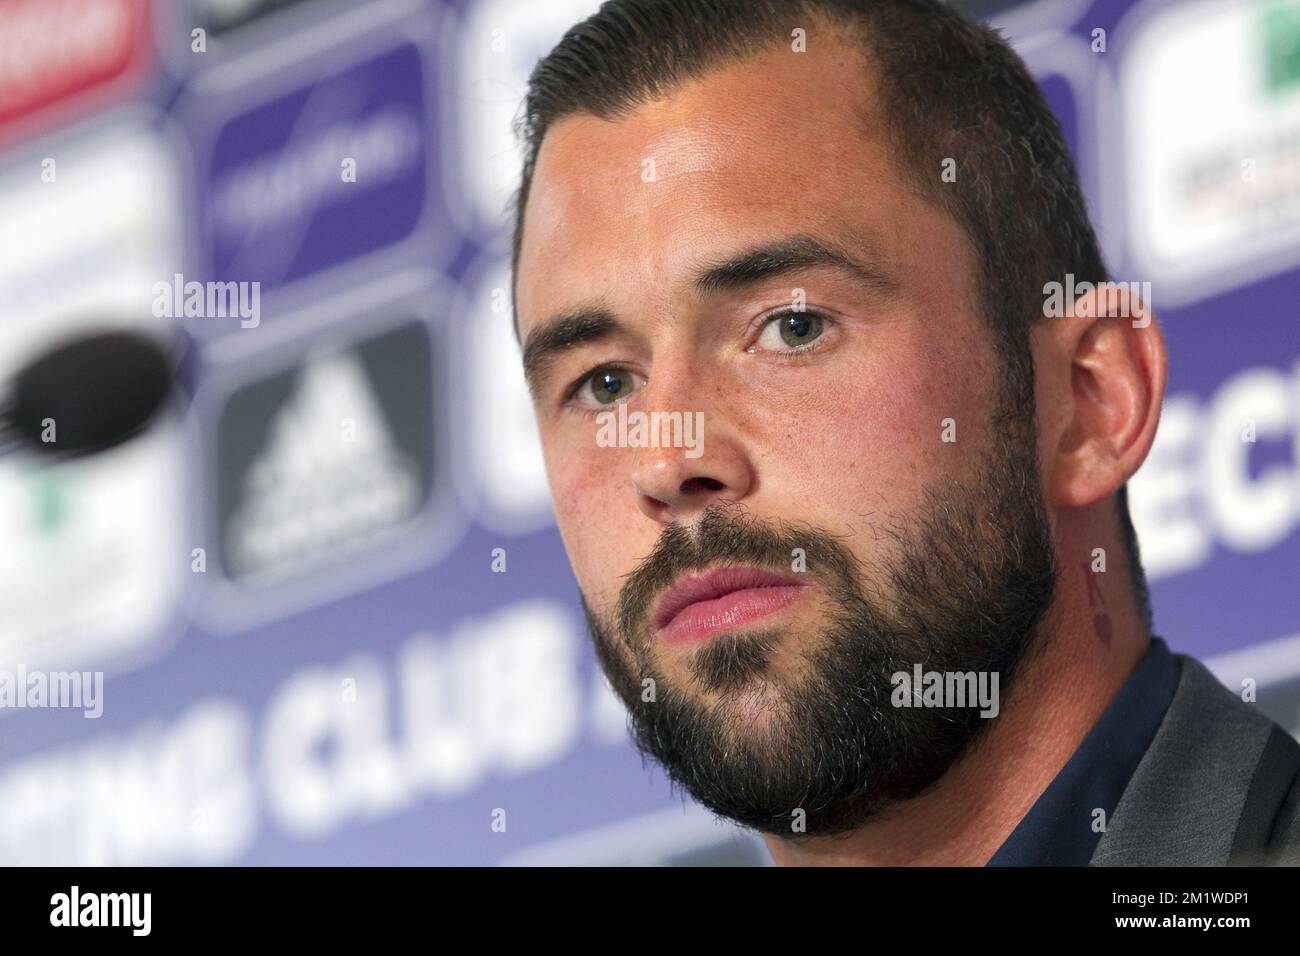 20140813 - BRUSSELS, BELGIUM: Anderlecht's new player Steven Defour pictured during a press conference of Belgian first division soccer team RSC Anderlecht to present their latest transfer, Wednesday 13 August 2014 in Brussels. Midfielder Steven Defour is coming over from Portuguese team F.C. Porto. BELGA PHOTO KRISTOF VAN ACCOM Stock Photo